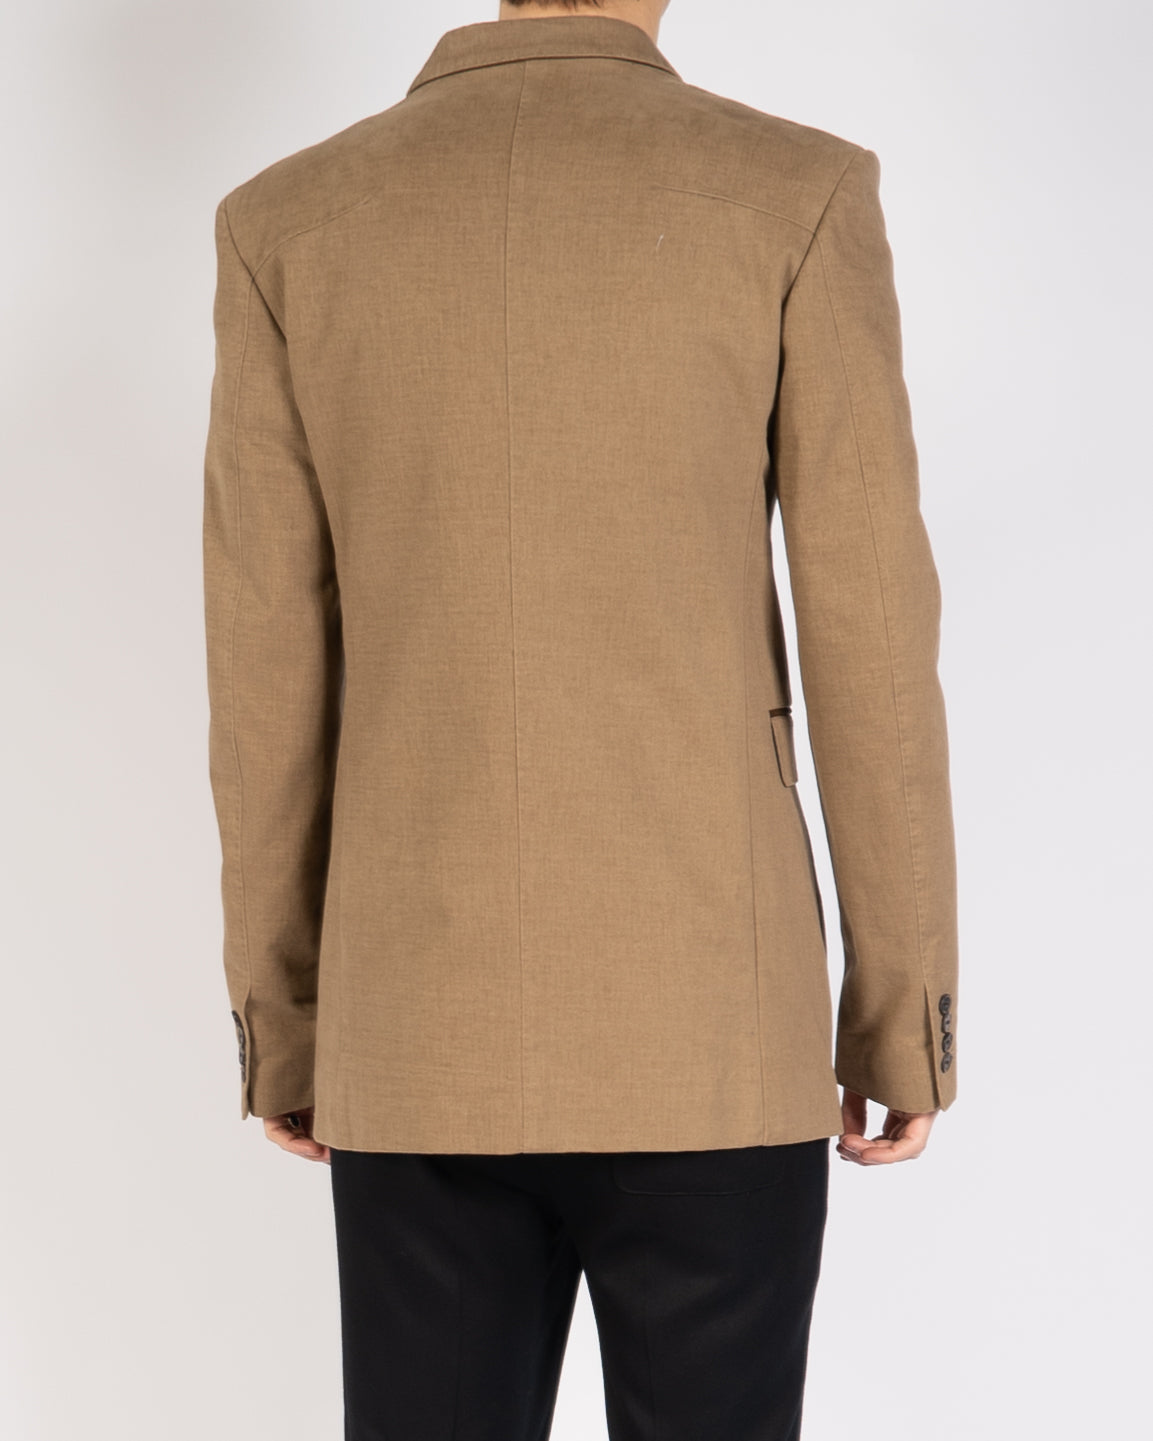 FW20 Brown Double Breasted Blazer Sample